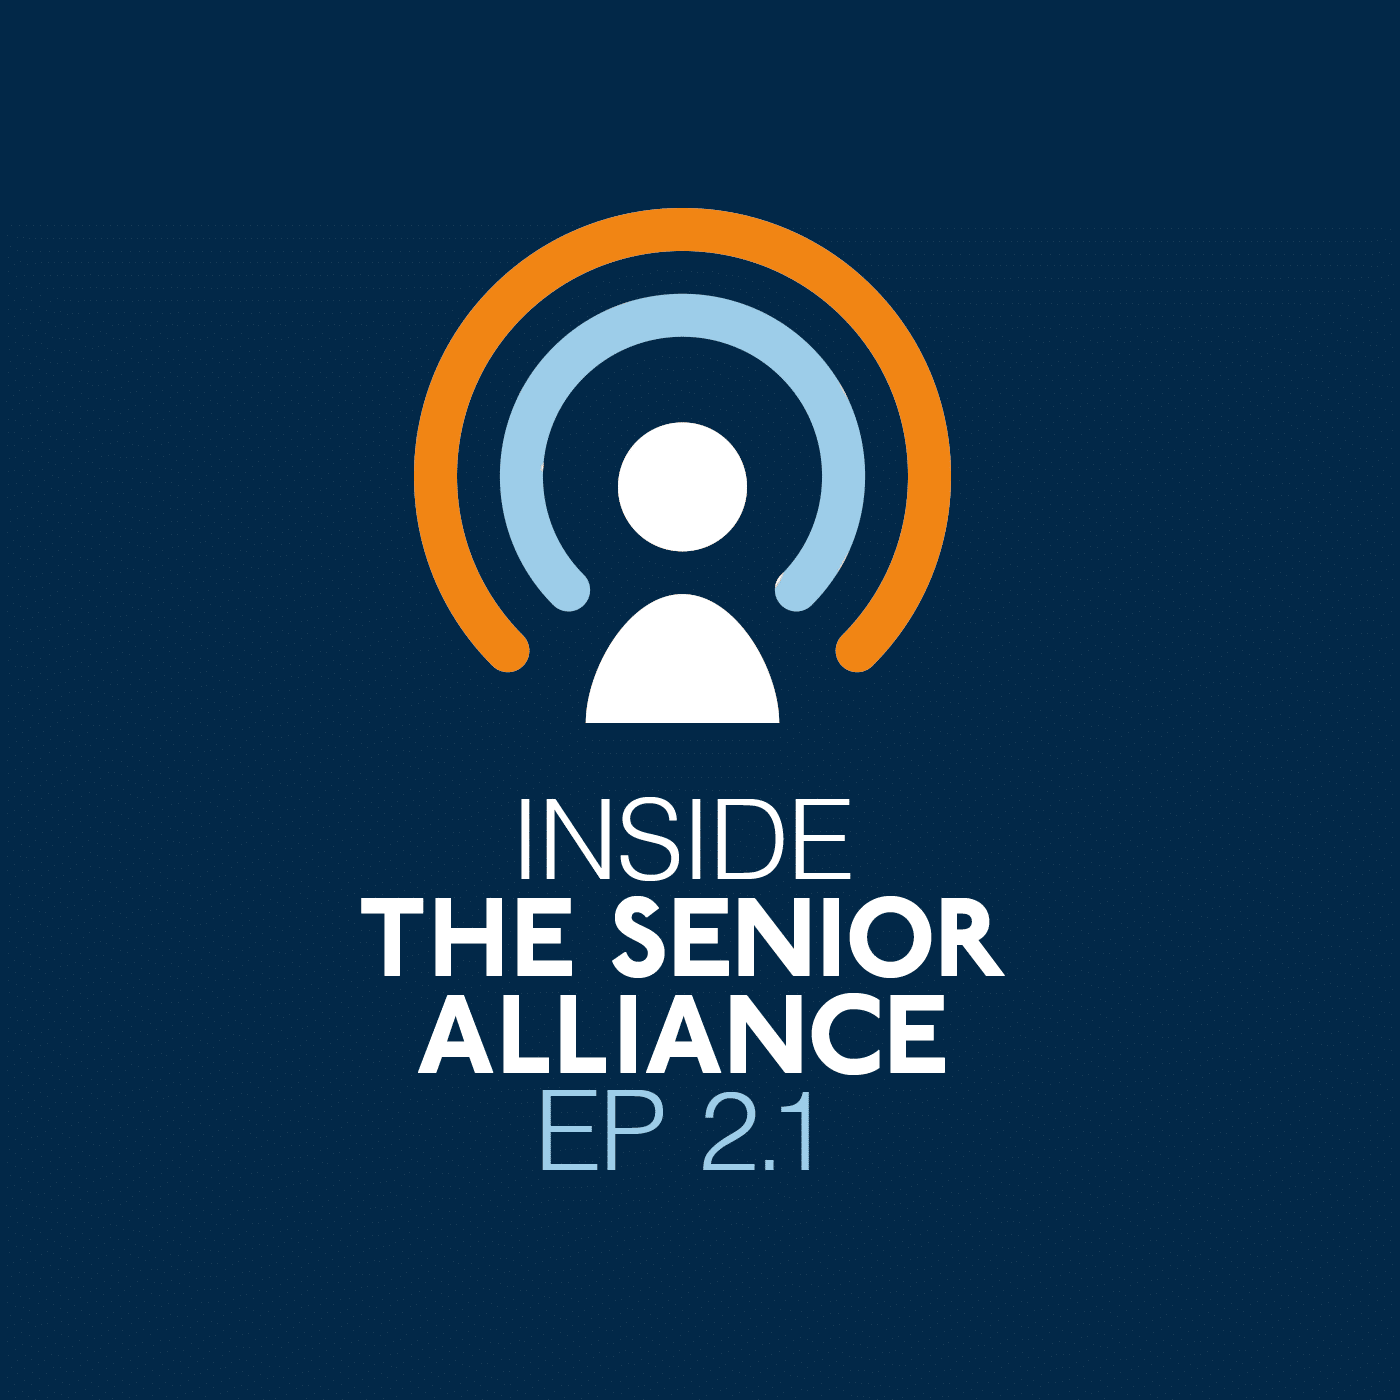 The Senior Alliance: Podcast Covers